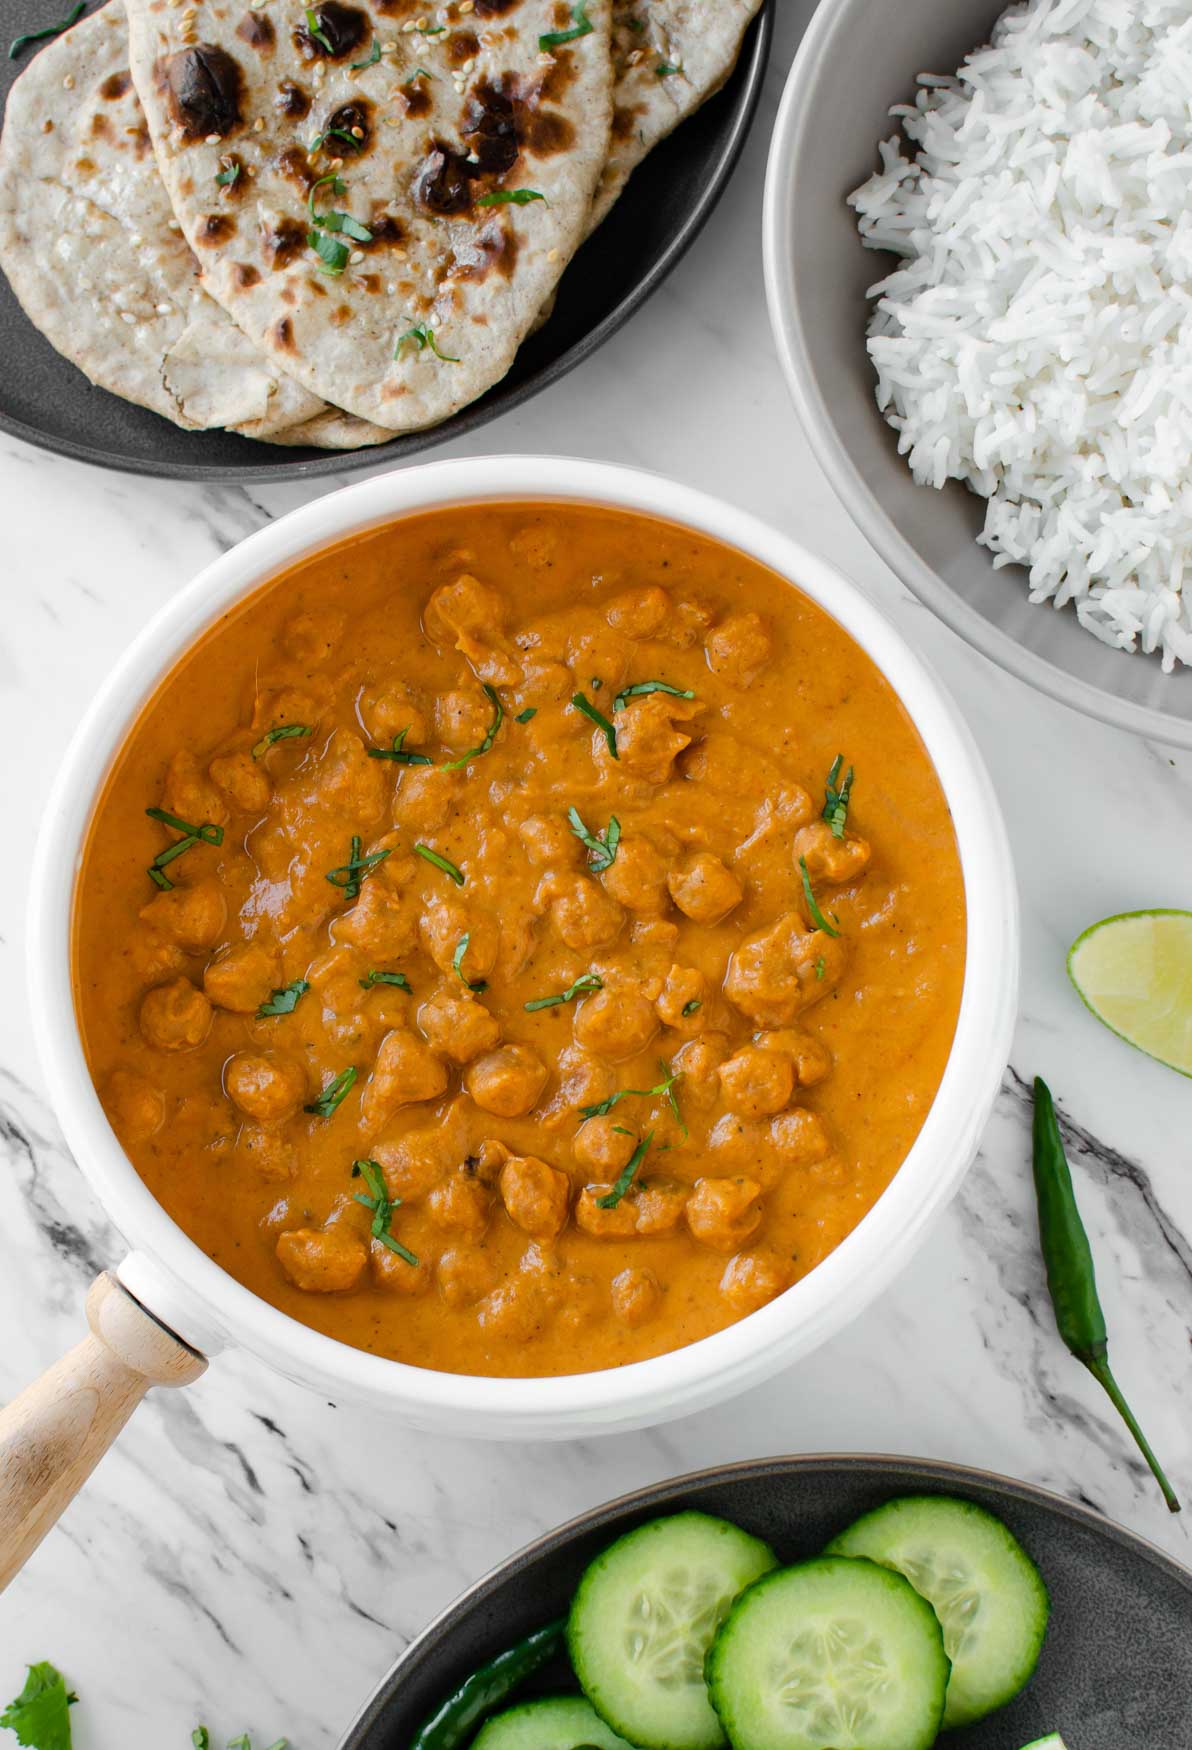 Chickpea tikka masala garnished with fresh cilantro in a serving bowl and served with whole wheat naan, plain rice, and cucumber slices on the side.